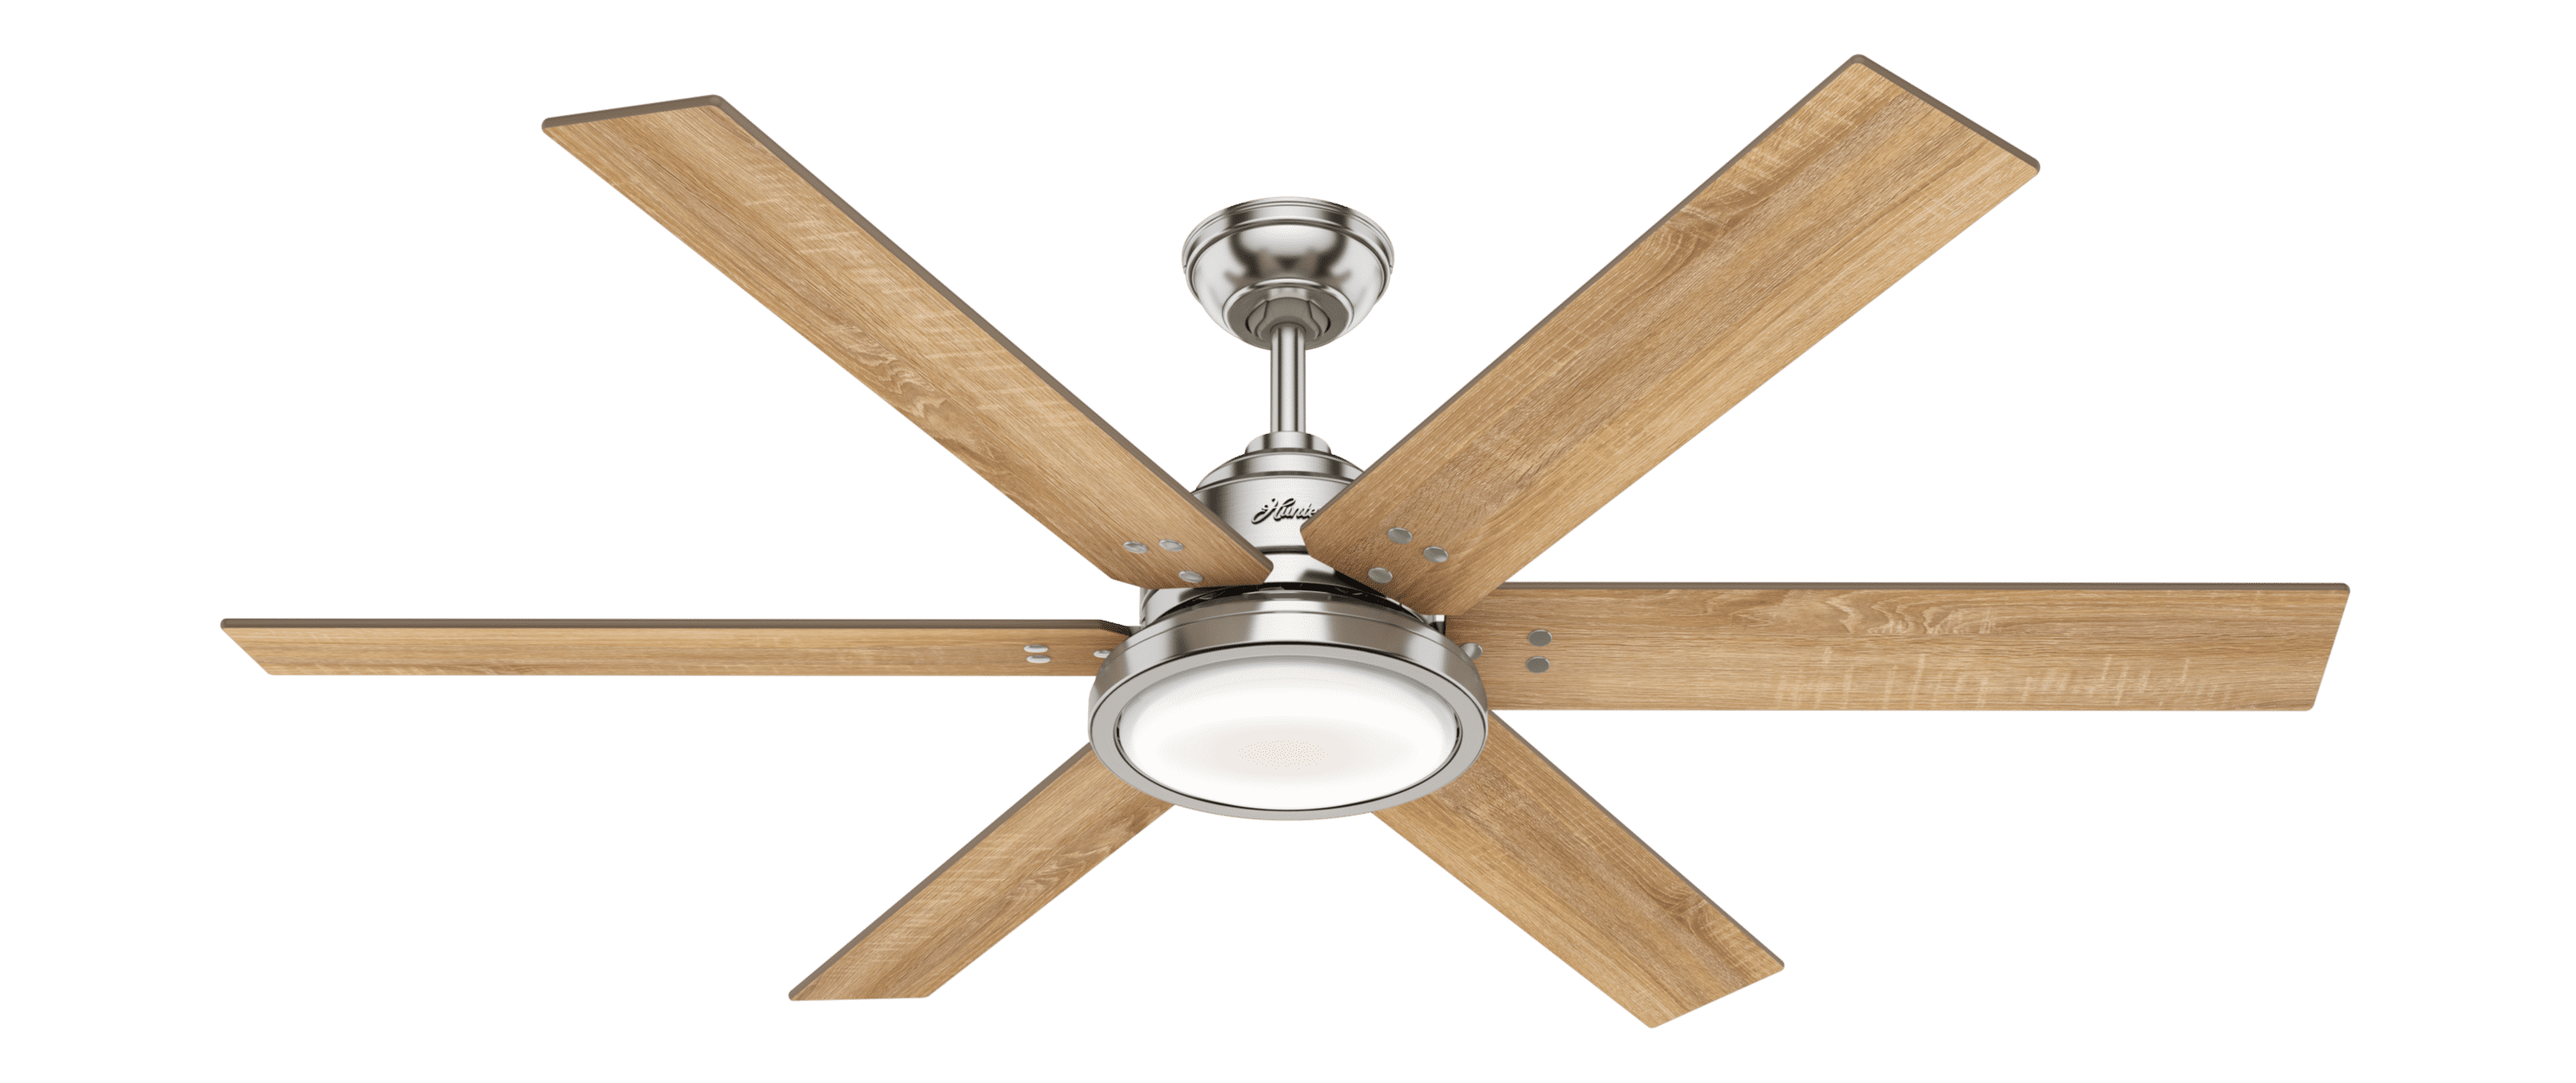 Hunter 60" Rustic Farmhouse Ceiling Fan with LED Light, Nickel Finish